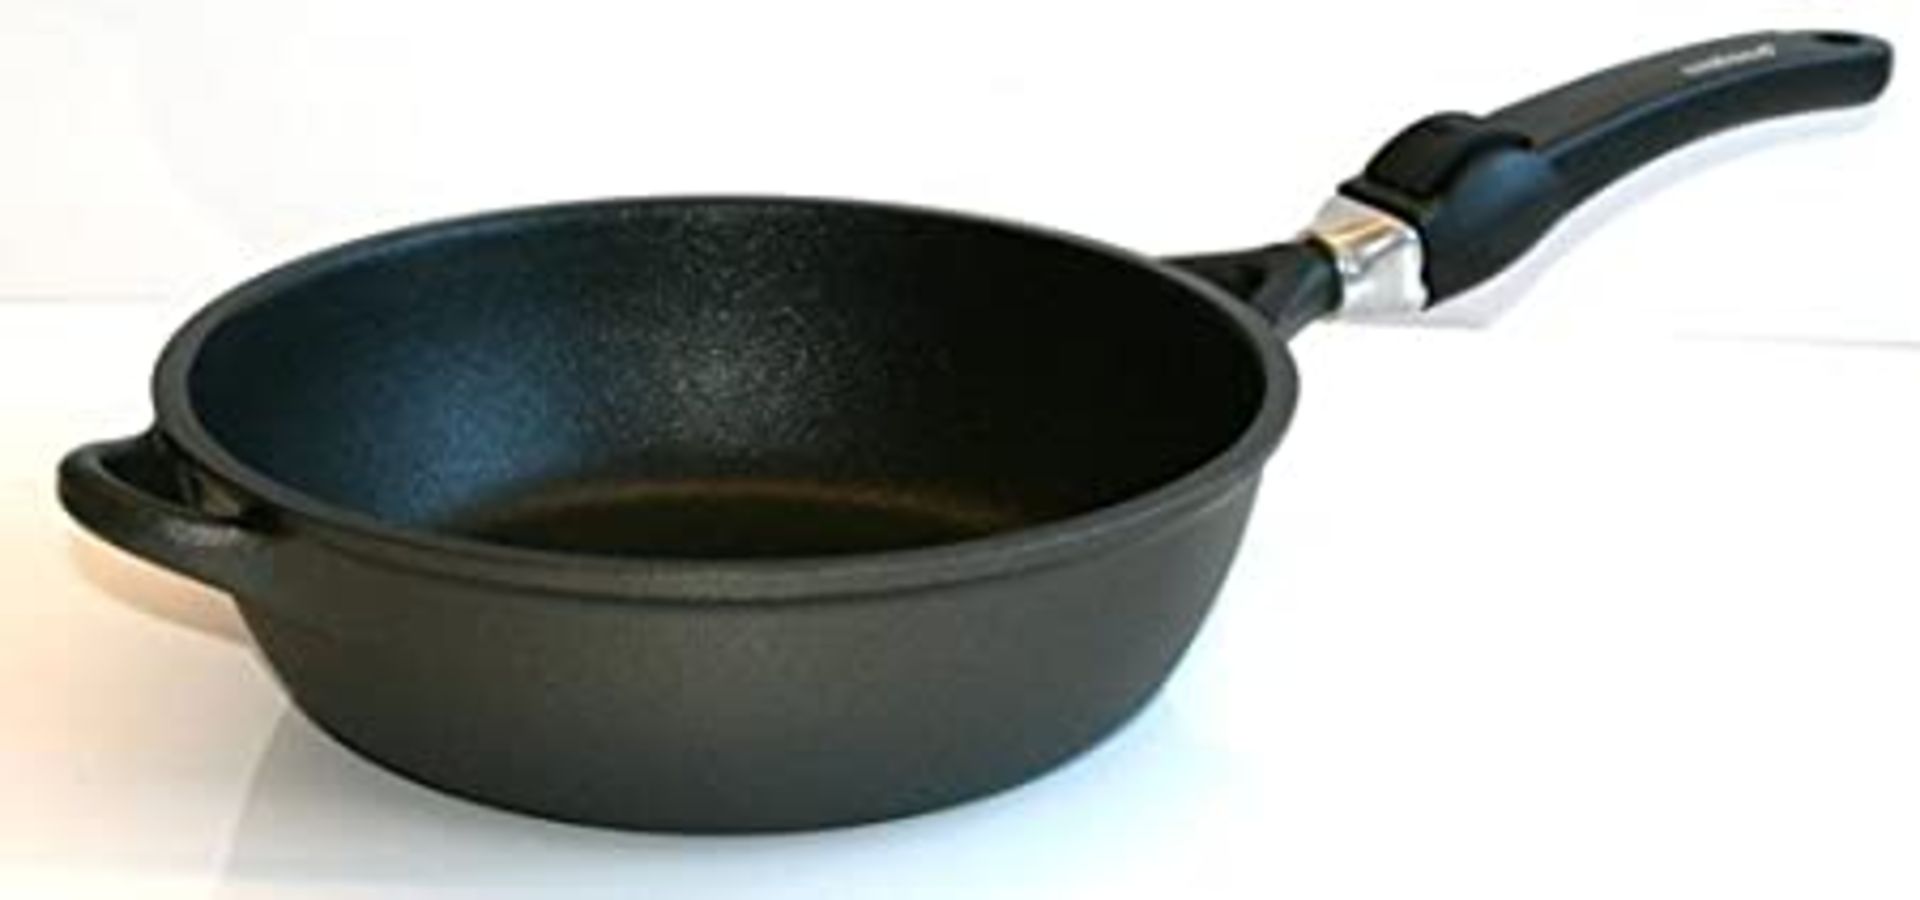 Crafond 28cm Saute Pan with detachable handle and lid - Image 3 of 5